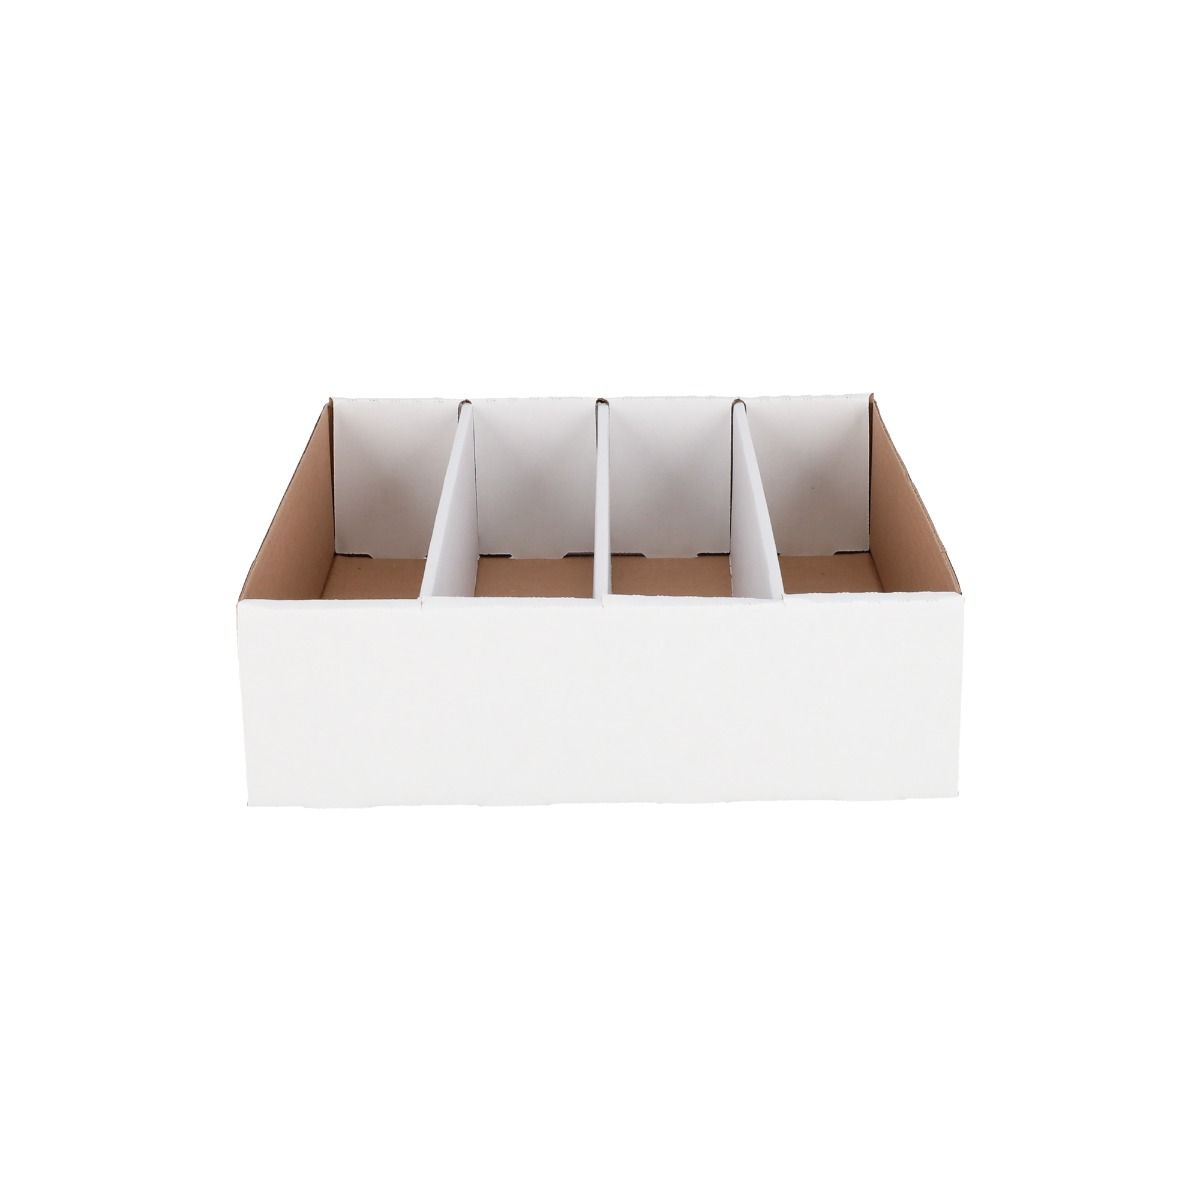 300 Count Card Storage Box - 10 Pack